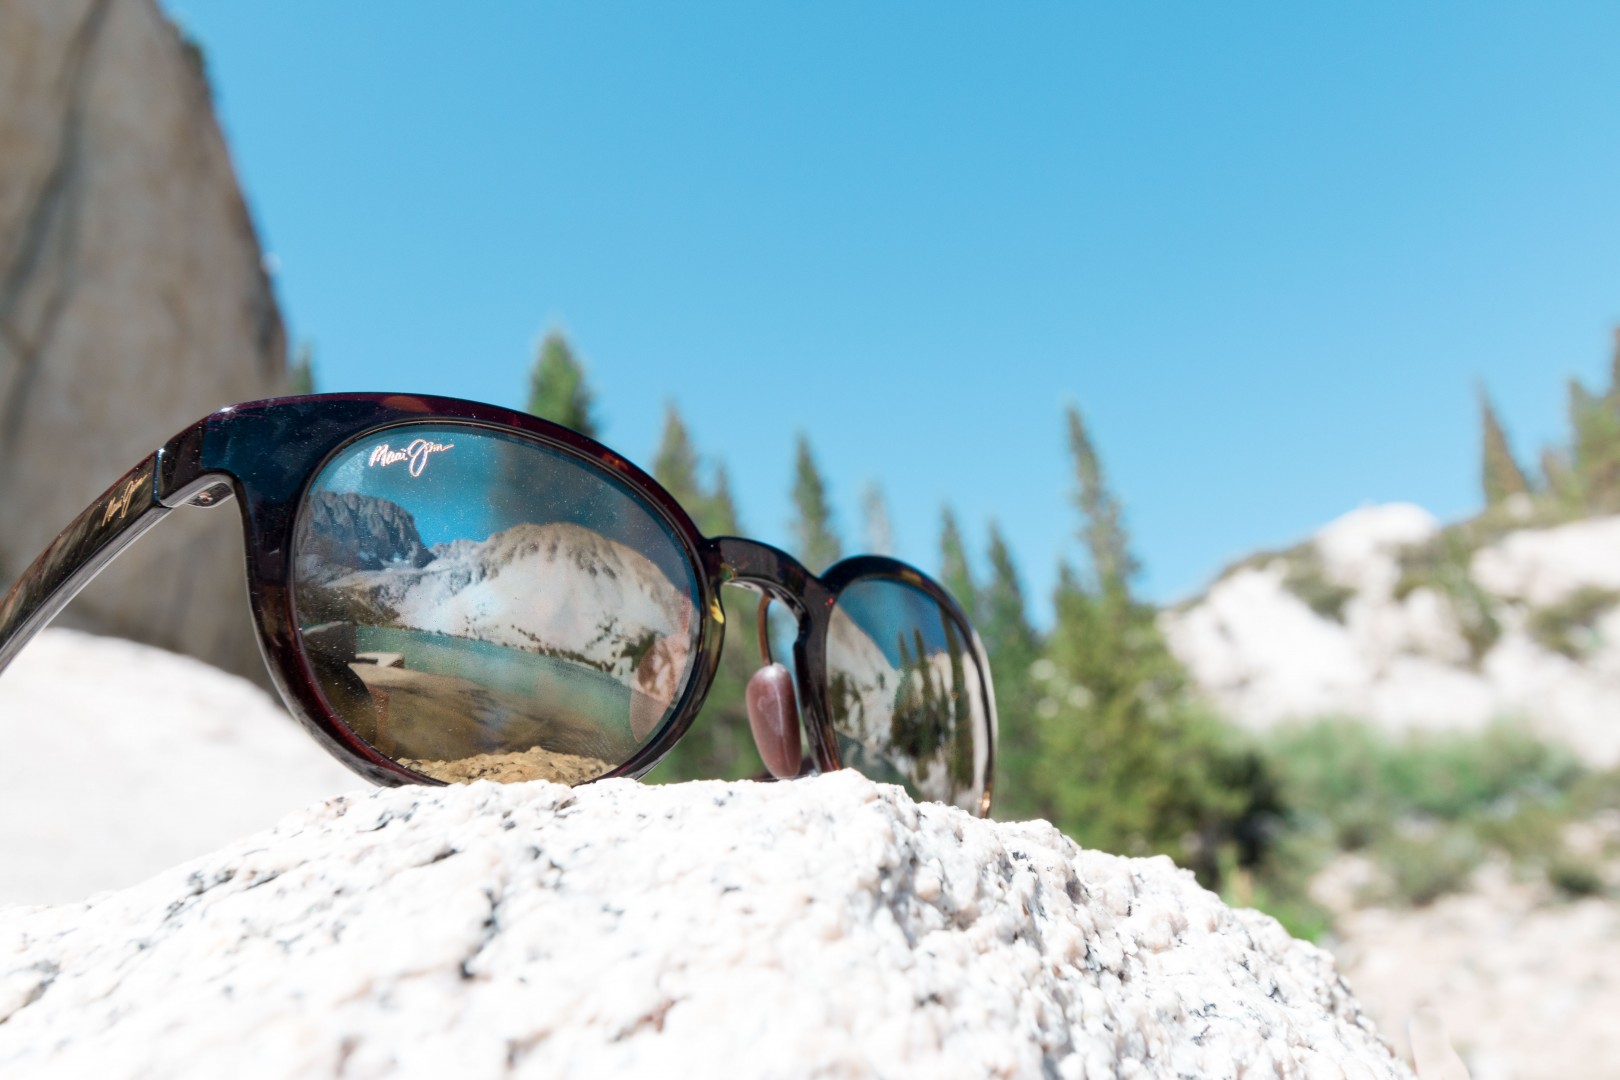 Maui Jim Sunglasses in What to pack for a day hike | California Packing List | Travel-Break.net